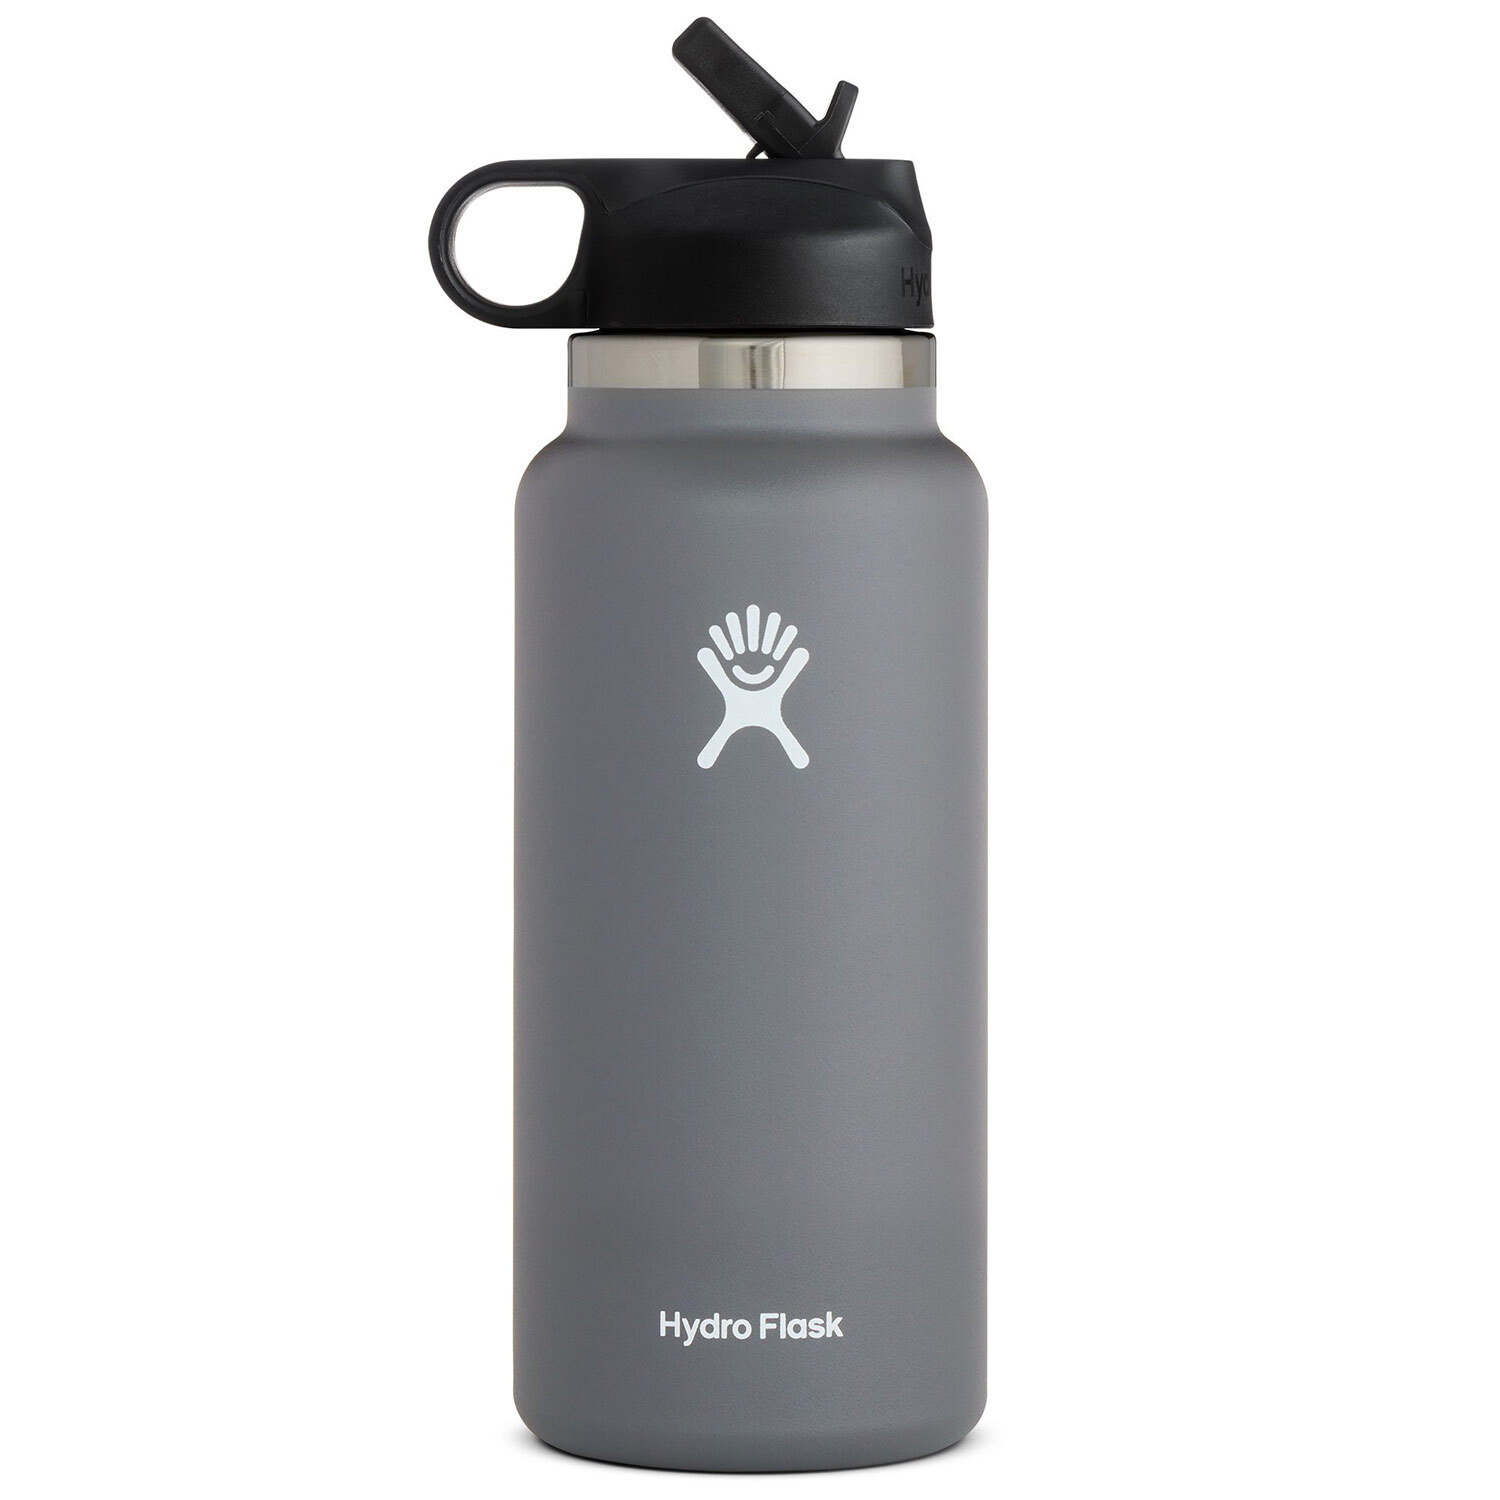 HydroMATE 32 oz Water Bottle with Straw Times Marked Frost Gray